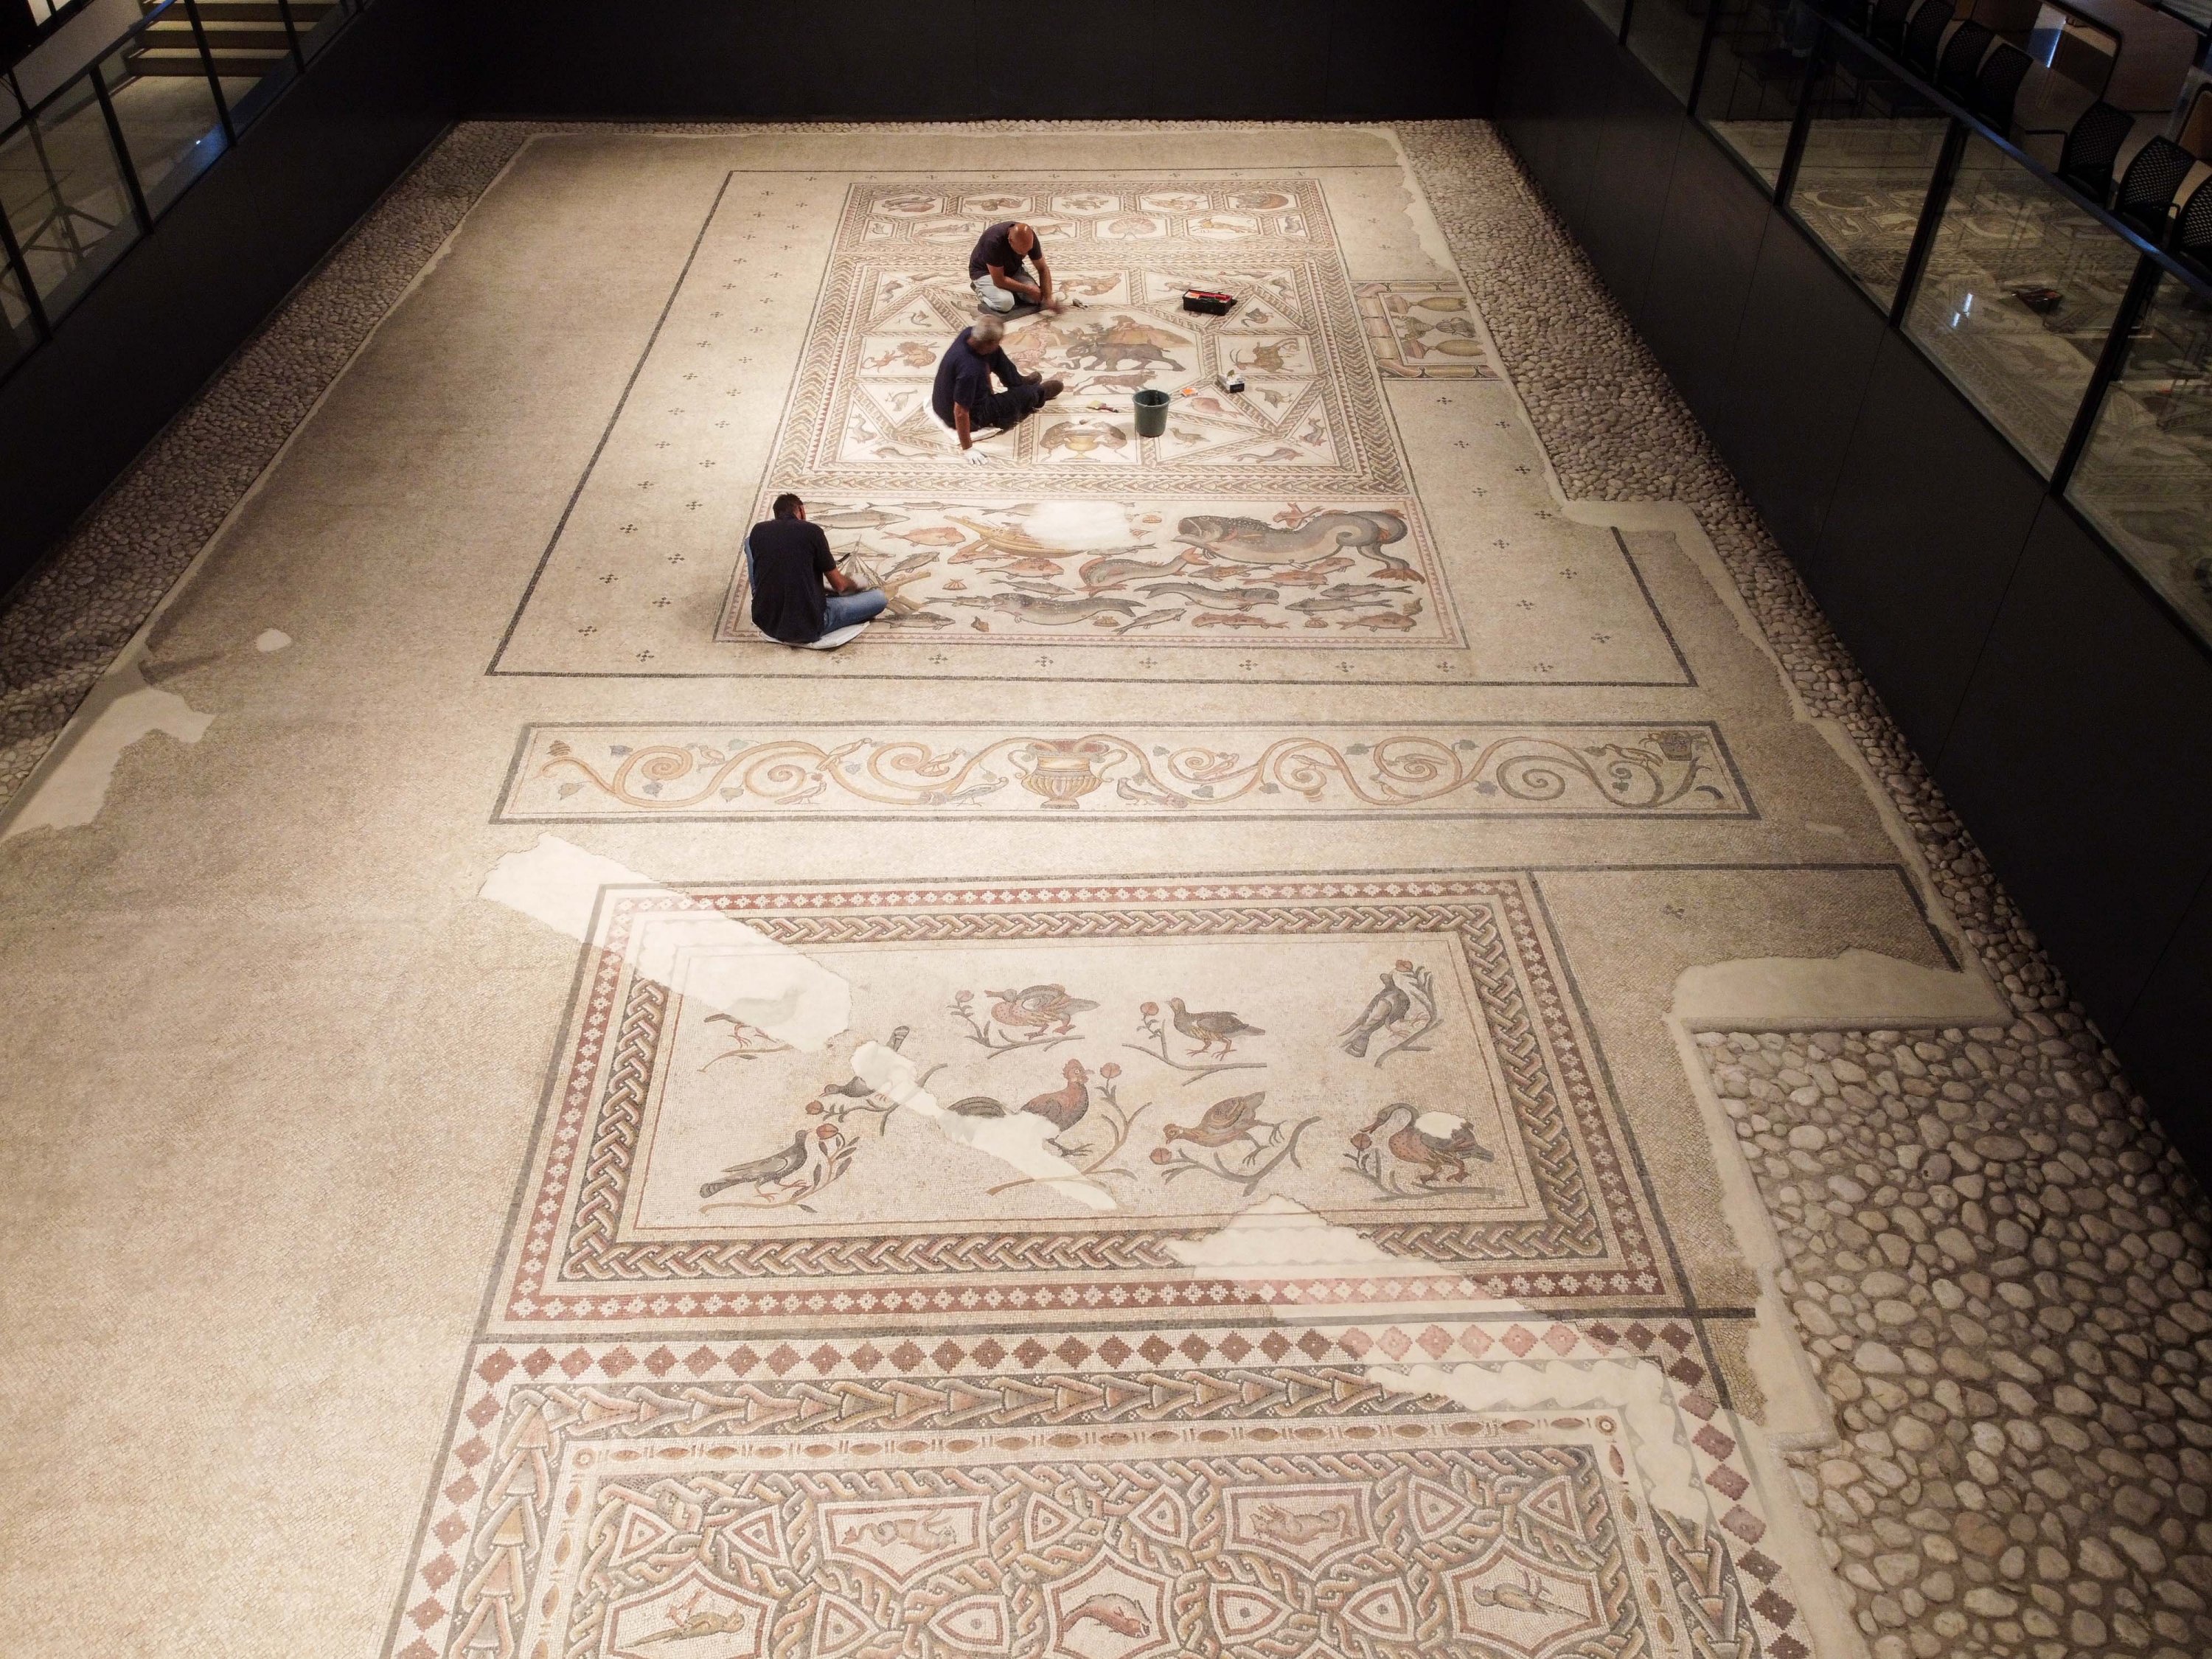 Unique mosaics exhibited at Lod Mosaic Archaeological Center in  Israel-Xinhua